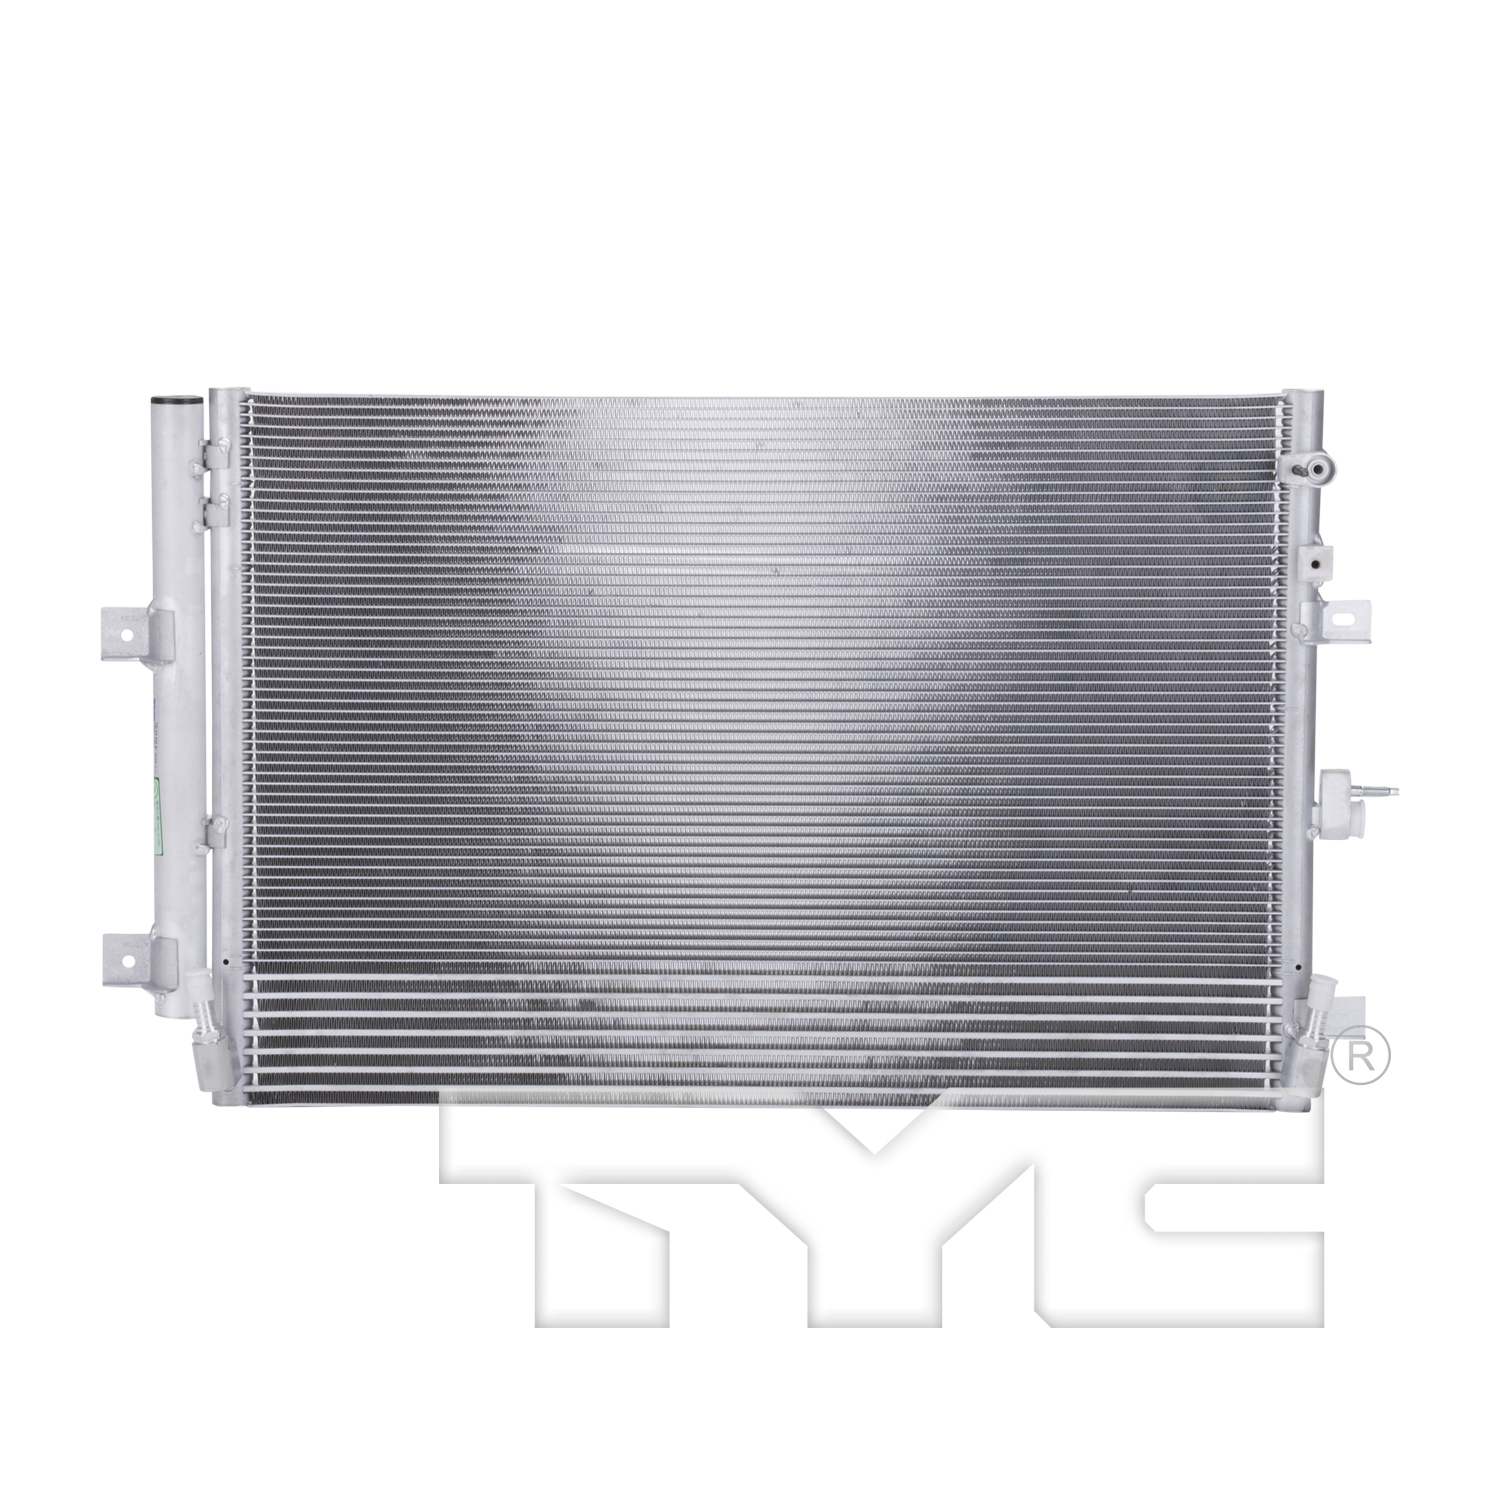 Aftermarket AC CONDENSERS for FORD - EDGE, EDGE,15-18,Air conditioning condenser